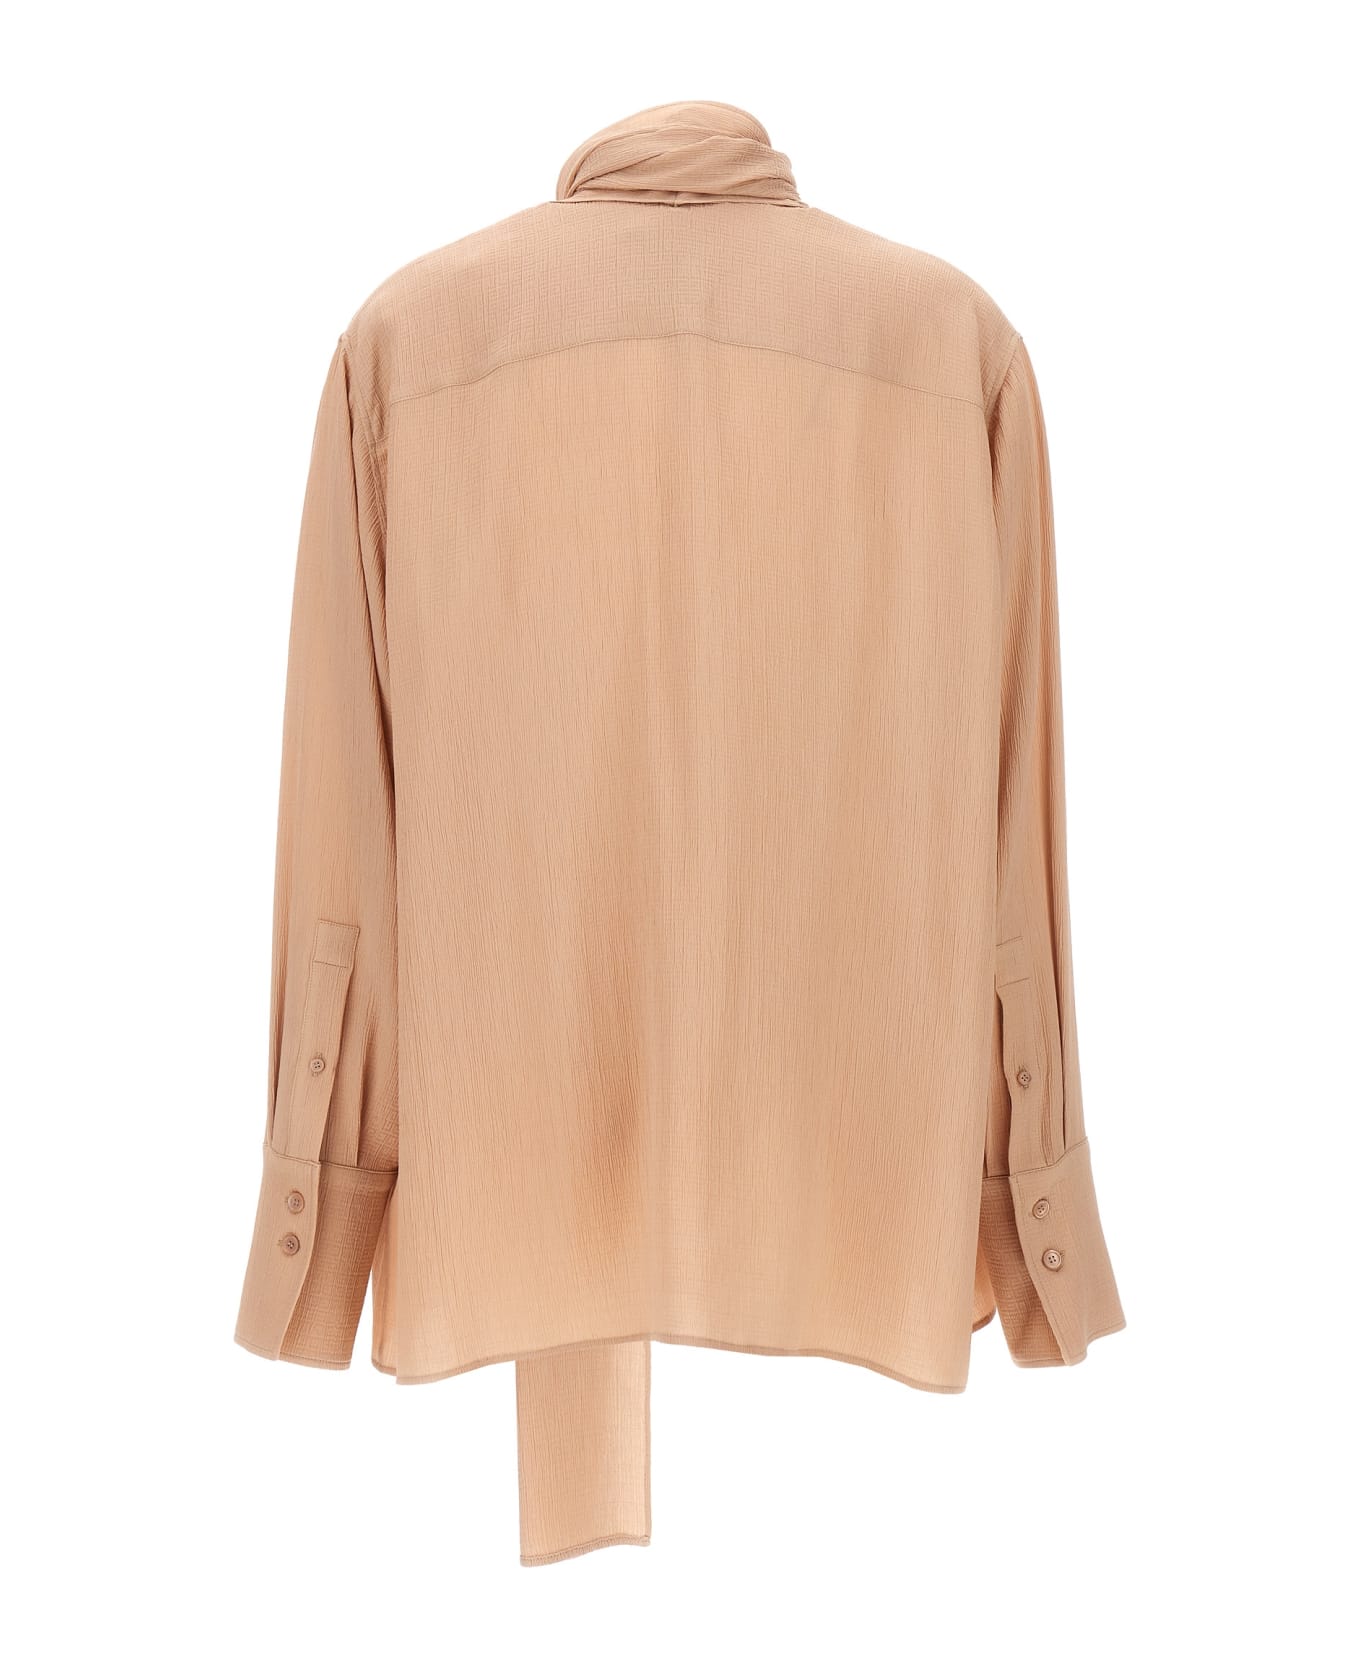 Givenchy Pussy Bow Blouse - Beige シャツ